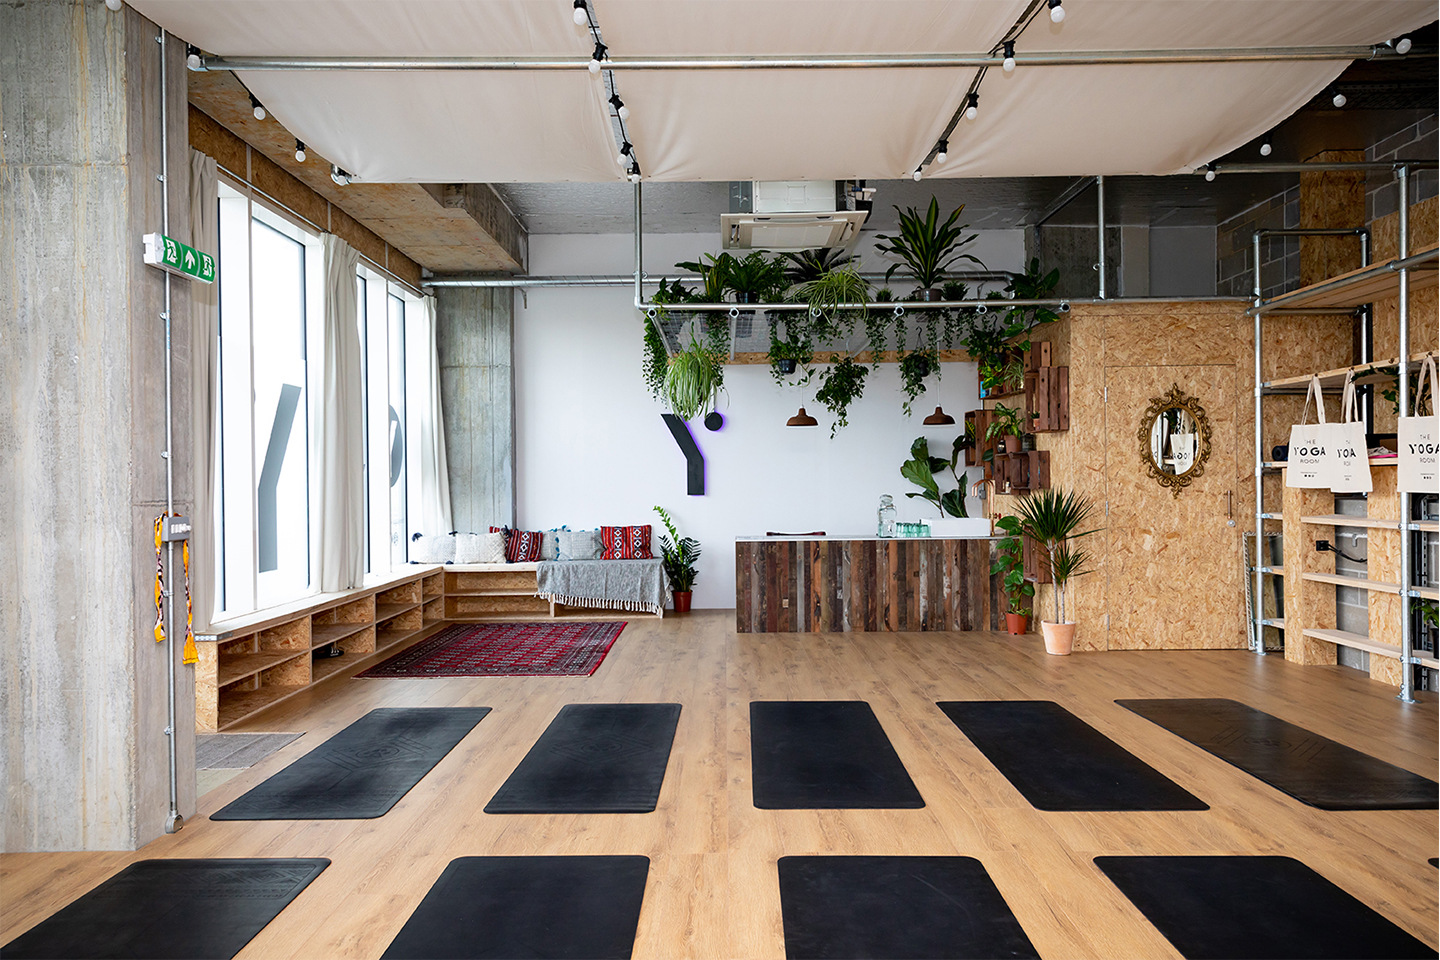 The Space Between - A yoga studio, community and brand